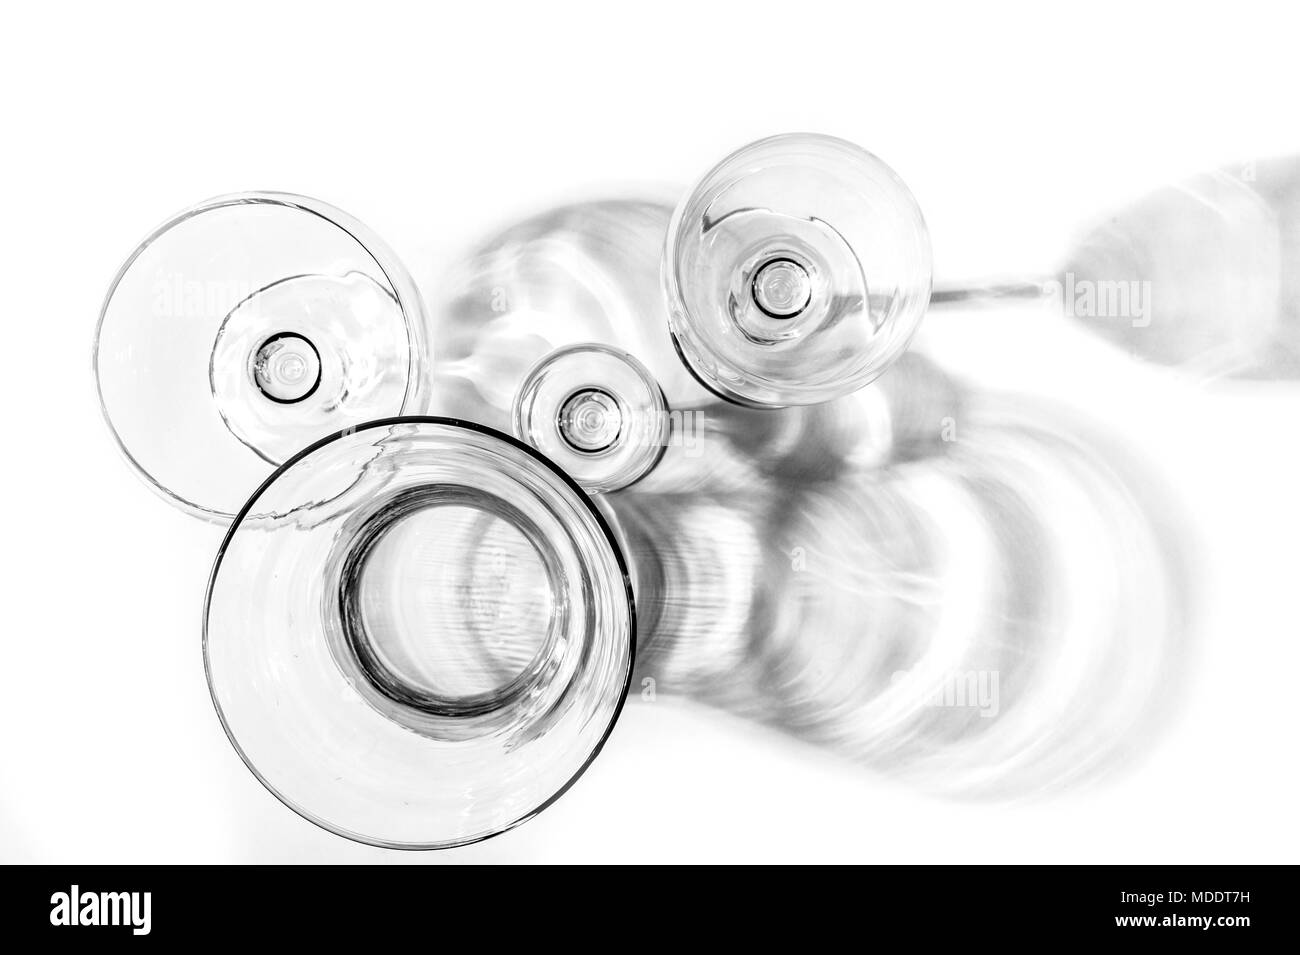 Abstract black and white photo of glassware Stock Photo